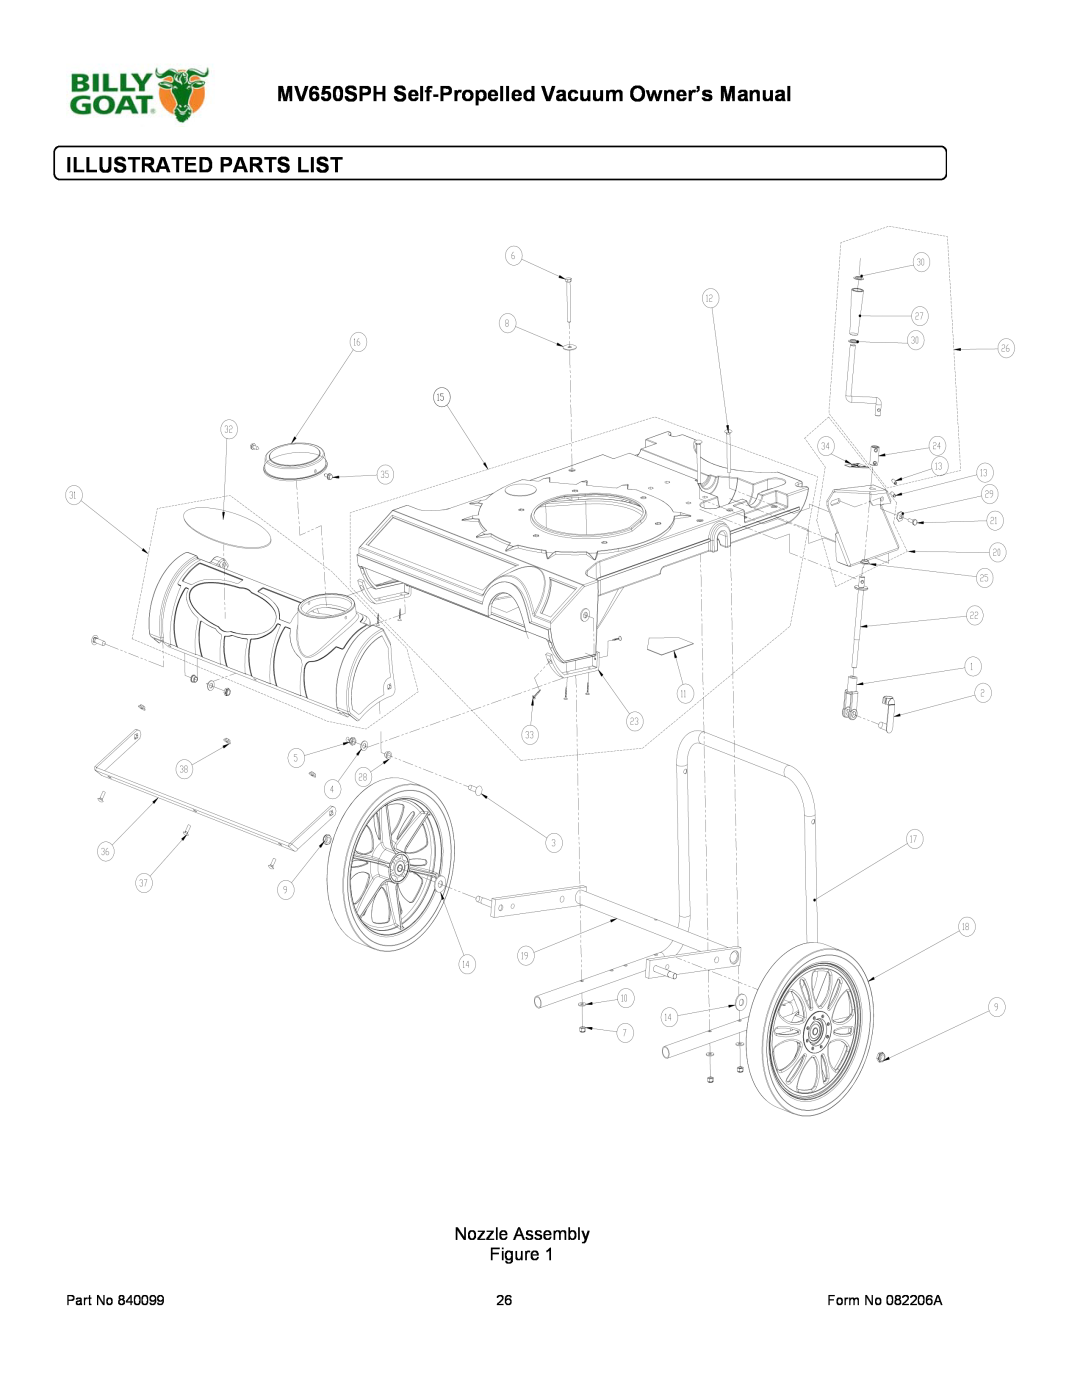 Billy Goat owner manual MV650SPH Self-Propelled Vacuum Owner’s Manual ILLUSTRATED PARTS LIST, Nozzle Assembly 